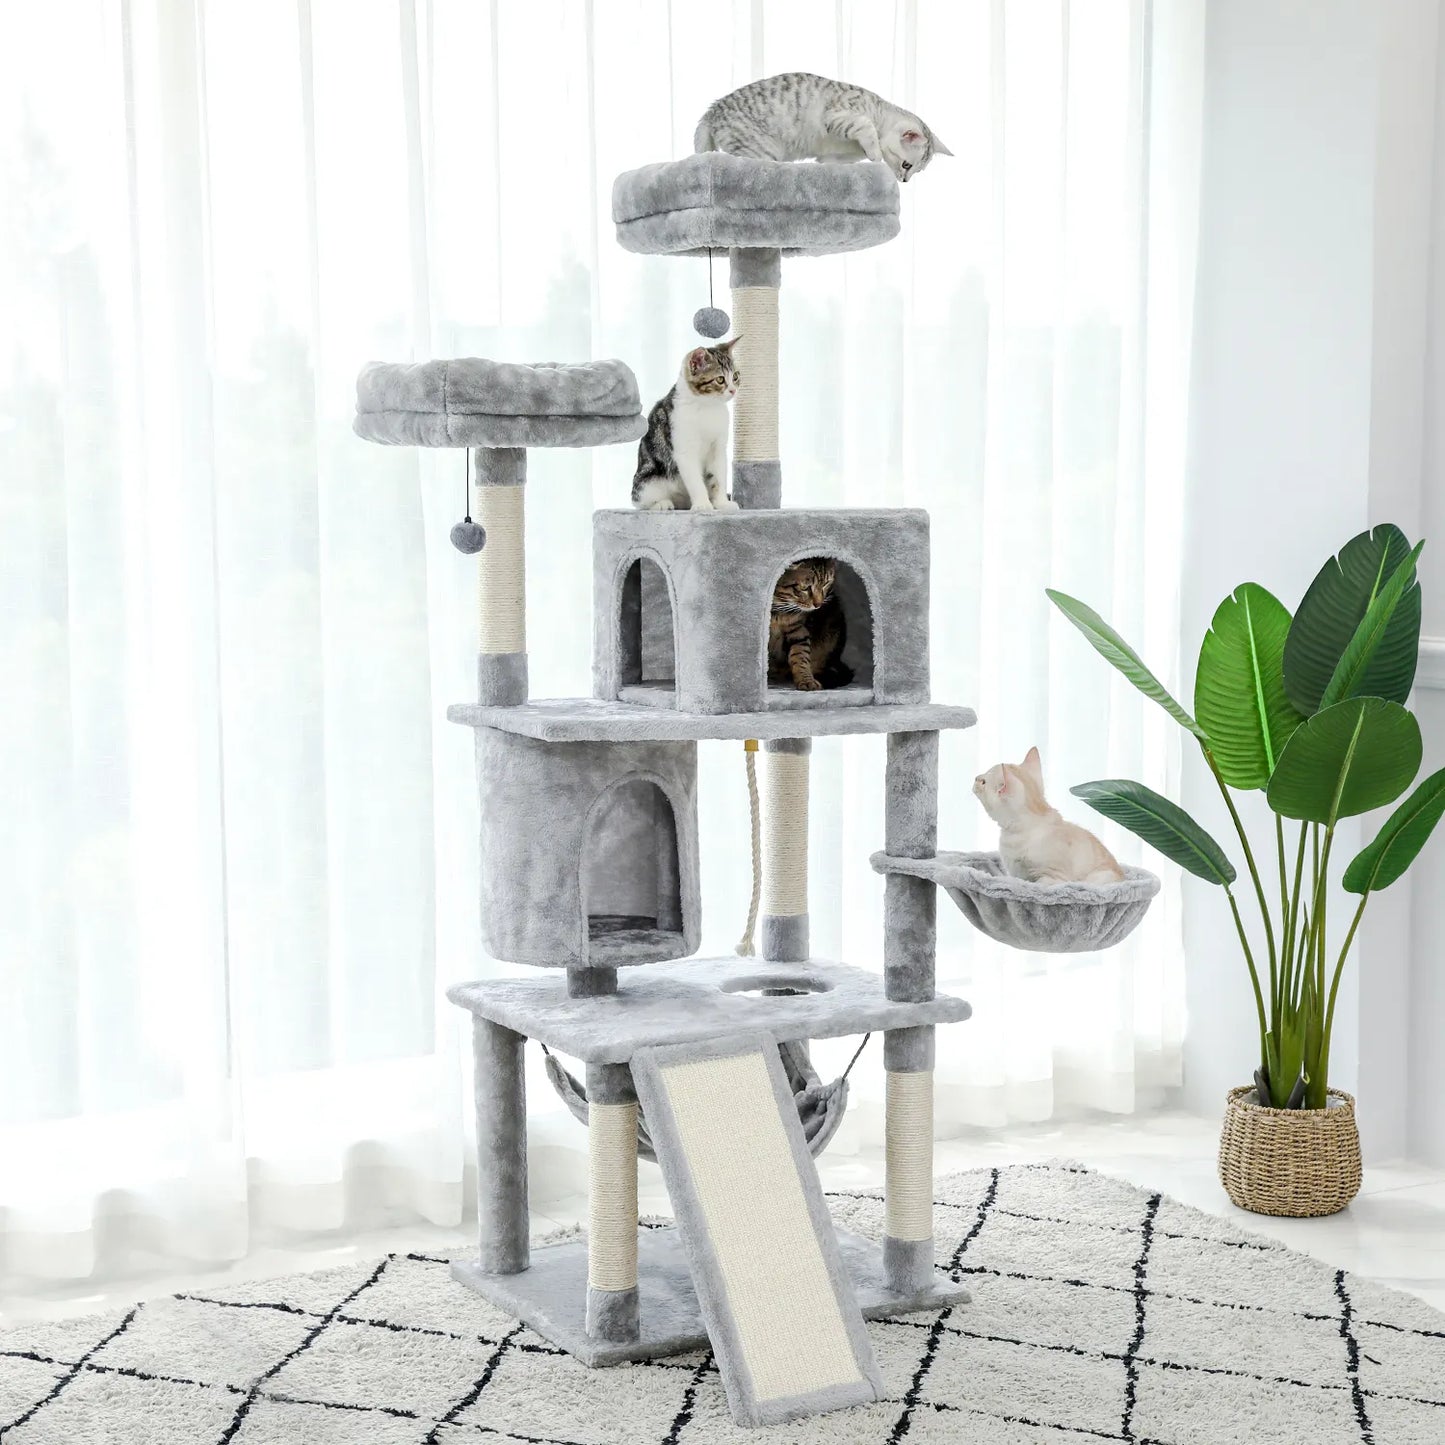 Fast Delivey Cat Tree Multilevel Cat Towers with Luxury Condos Cat Tree Tower Kitten когтеточка Condo Scratching Post